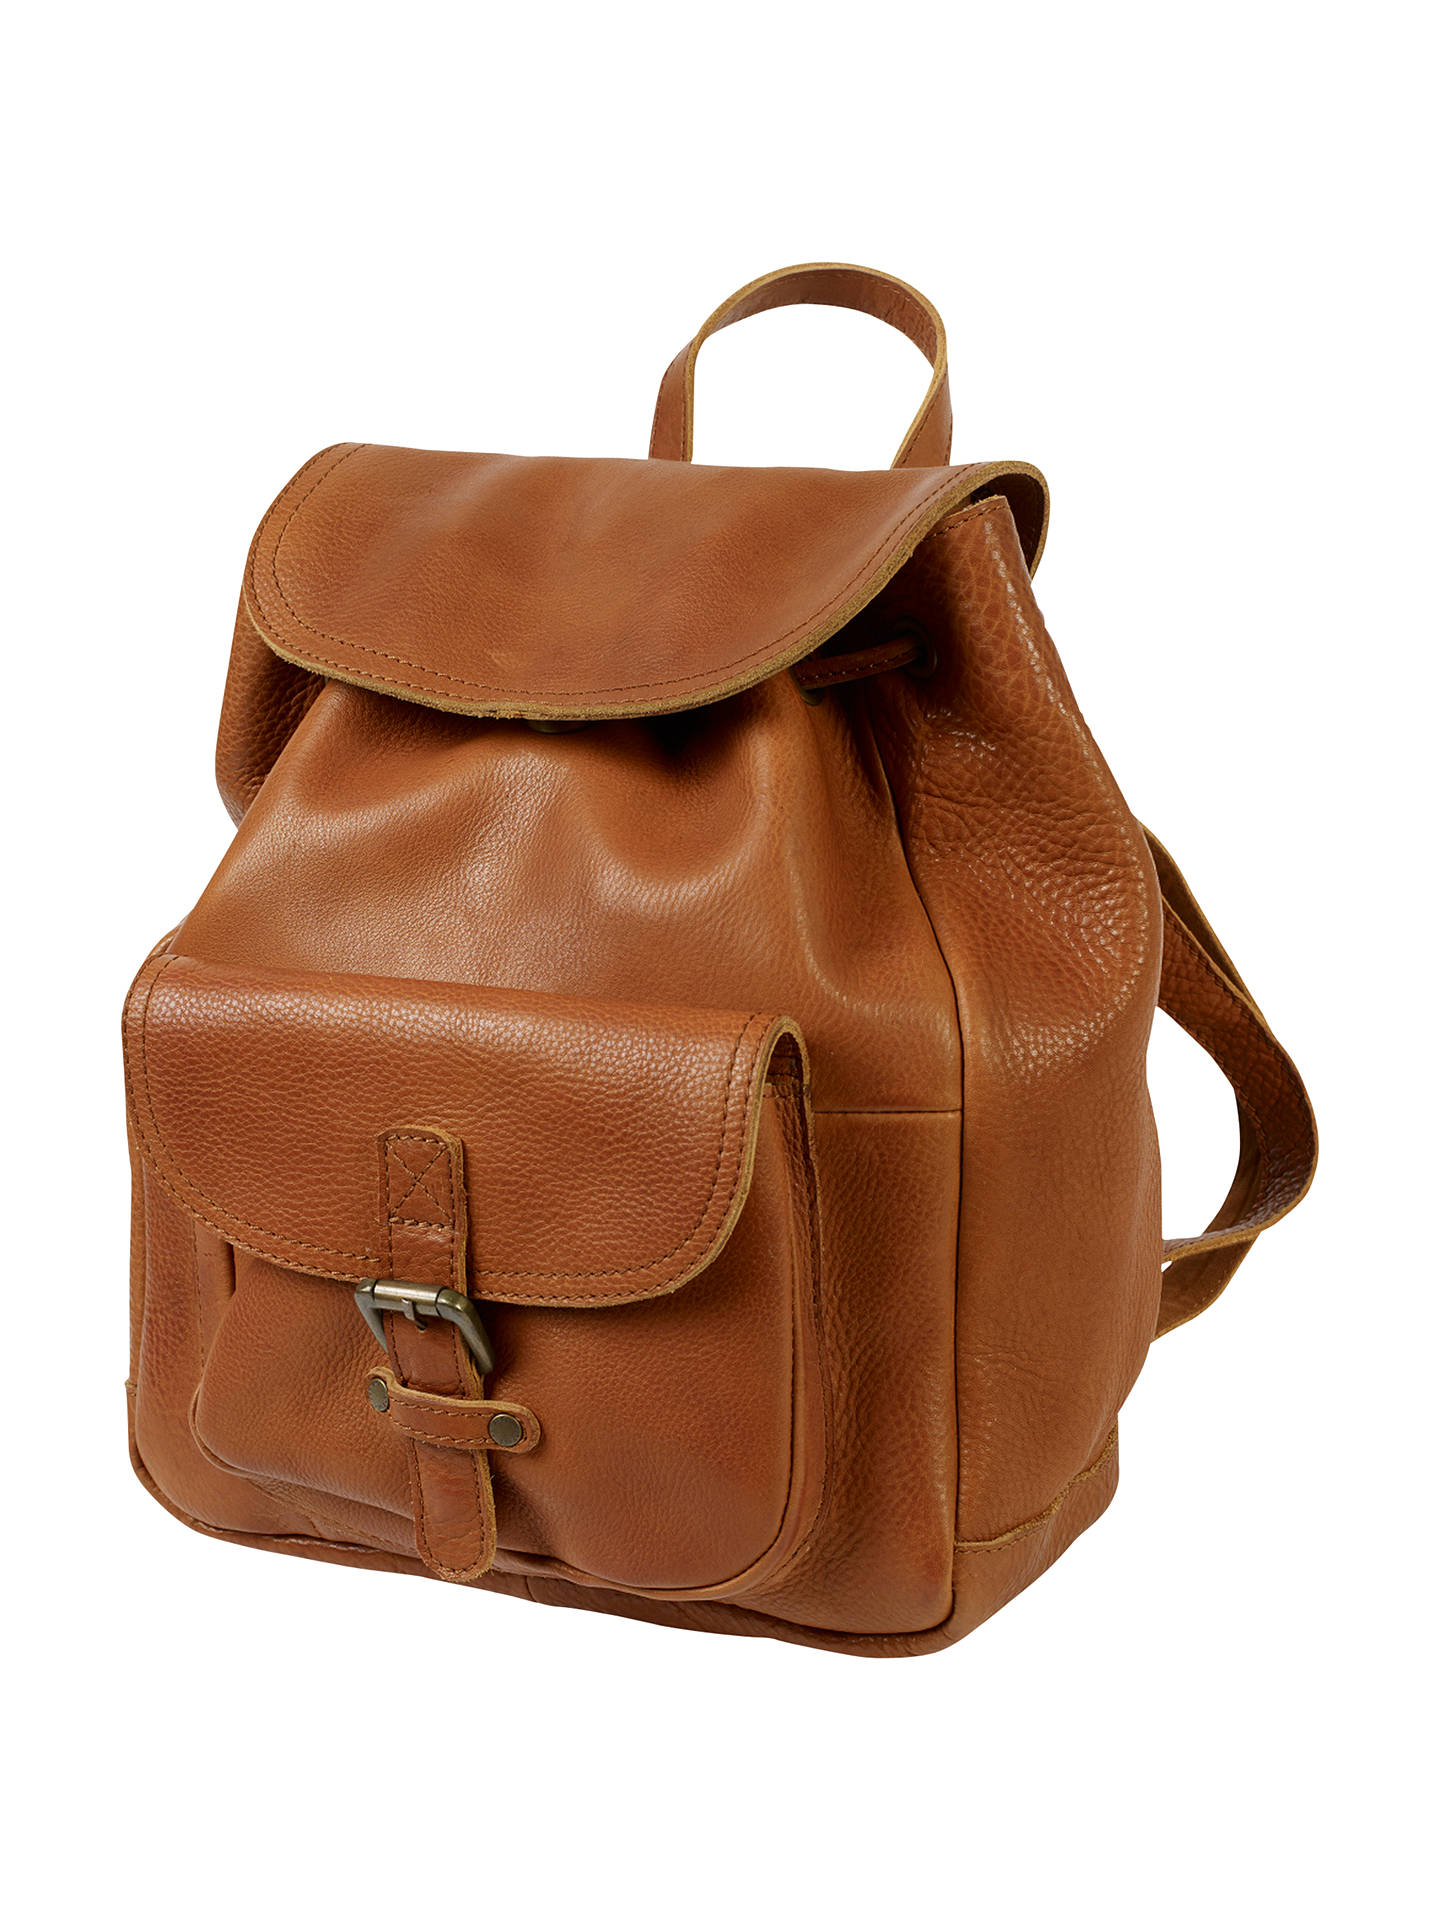 Fat Face Leather Rucksack at John Lewis & Partners